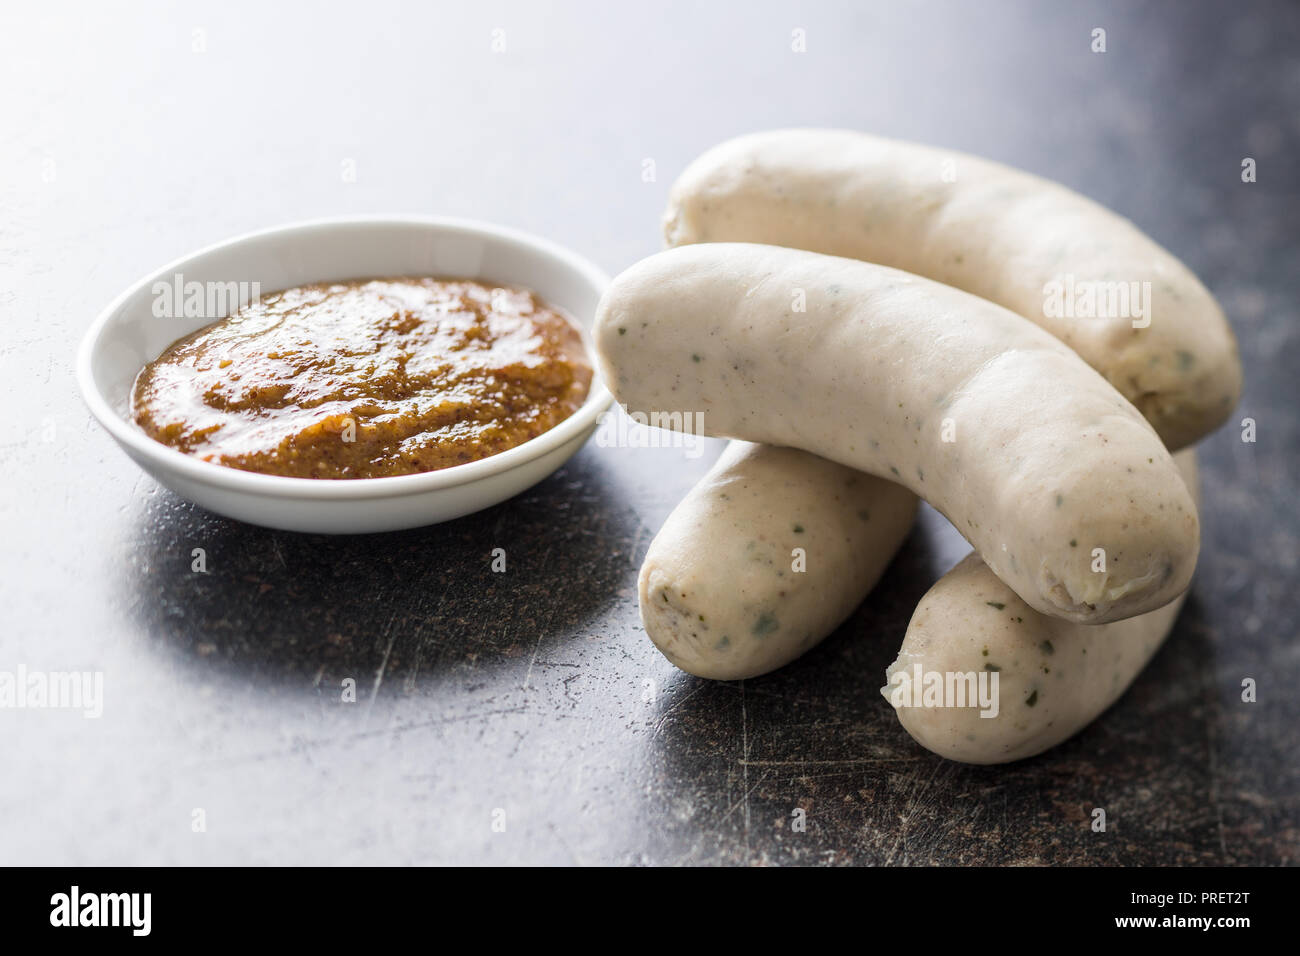 The bavarian weisswurst and mustard on kitchen table. Stock Photo